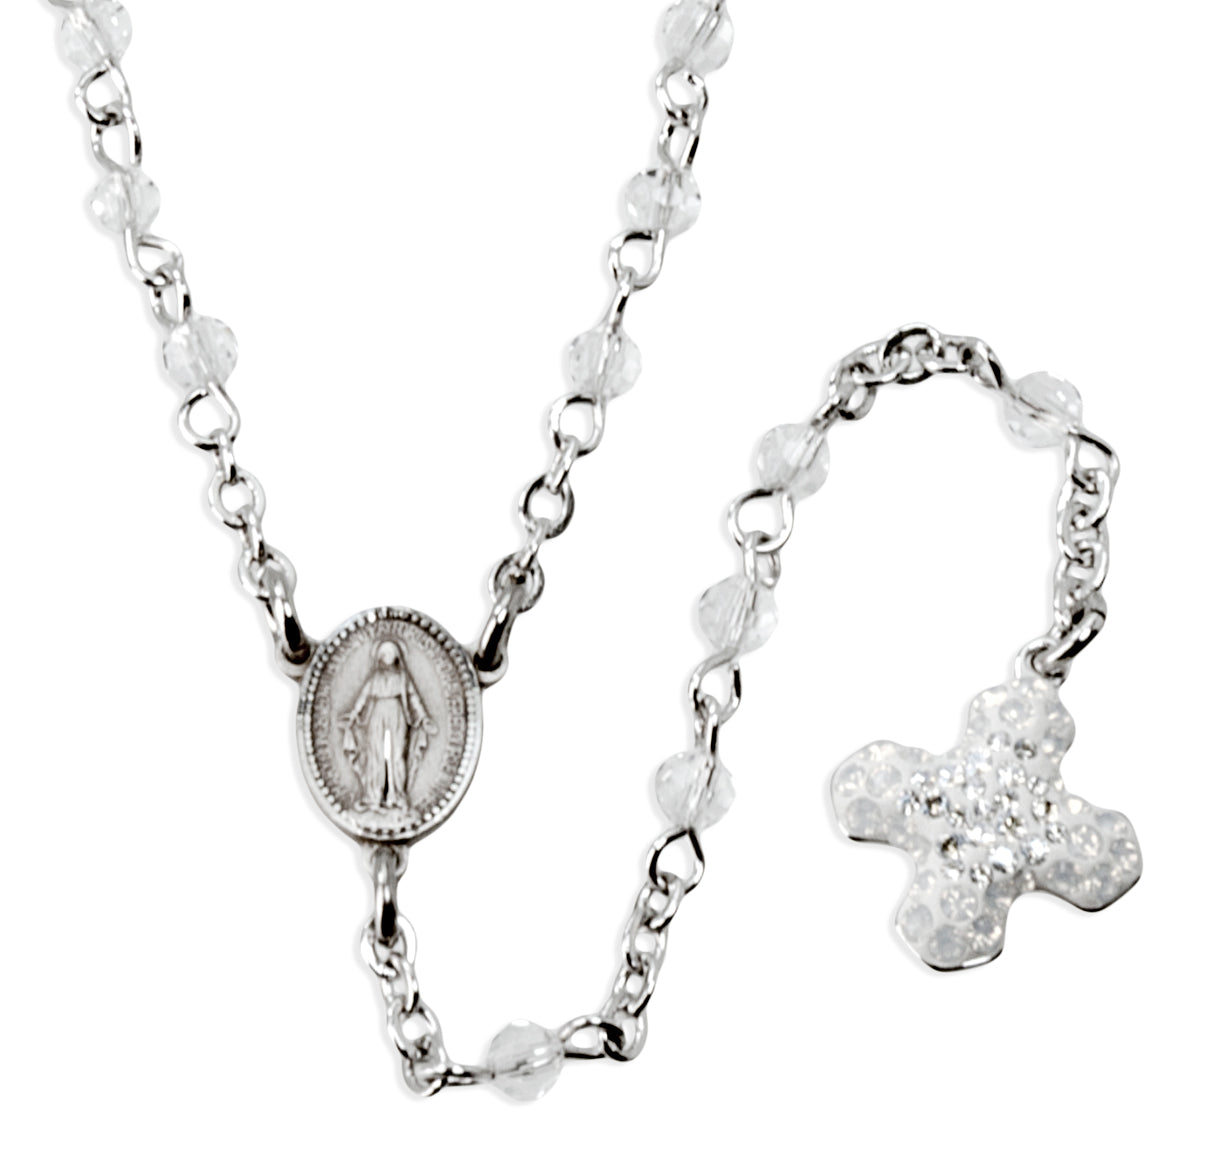 Crystal Bead Sterling Silver Rosary Necklace